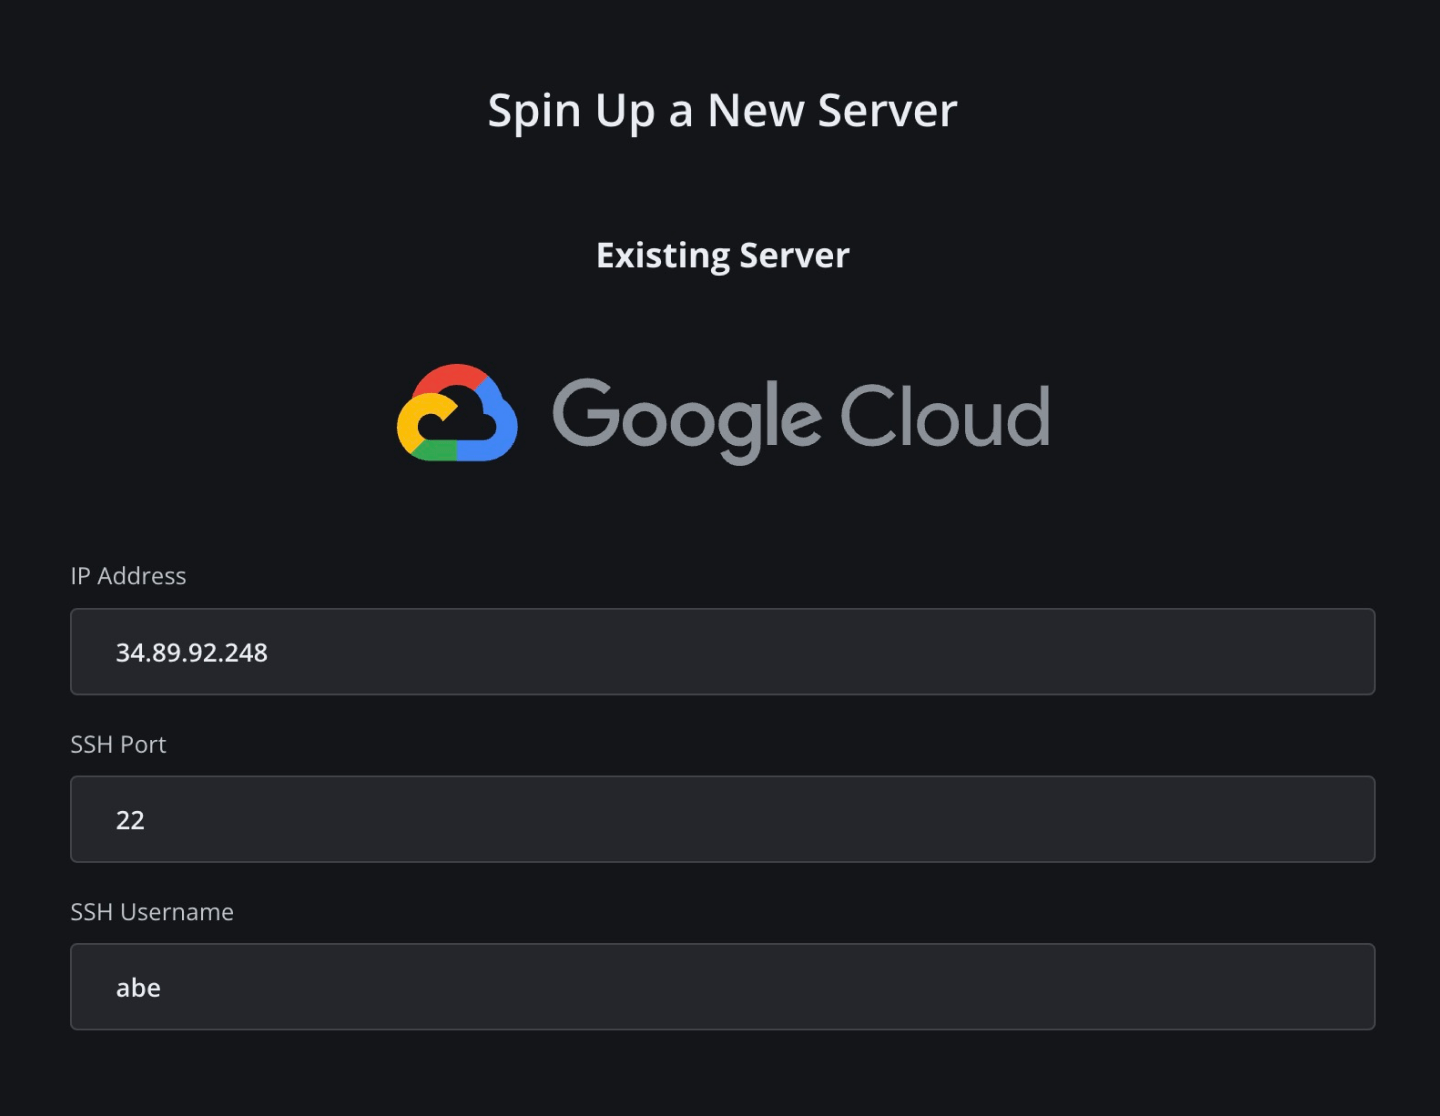 Connect SpinupWP to your new Google Compute Engine VM instance